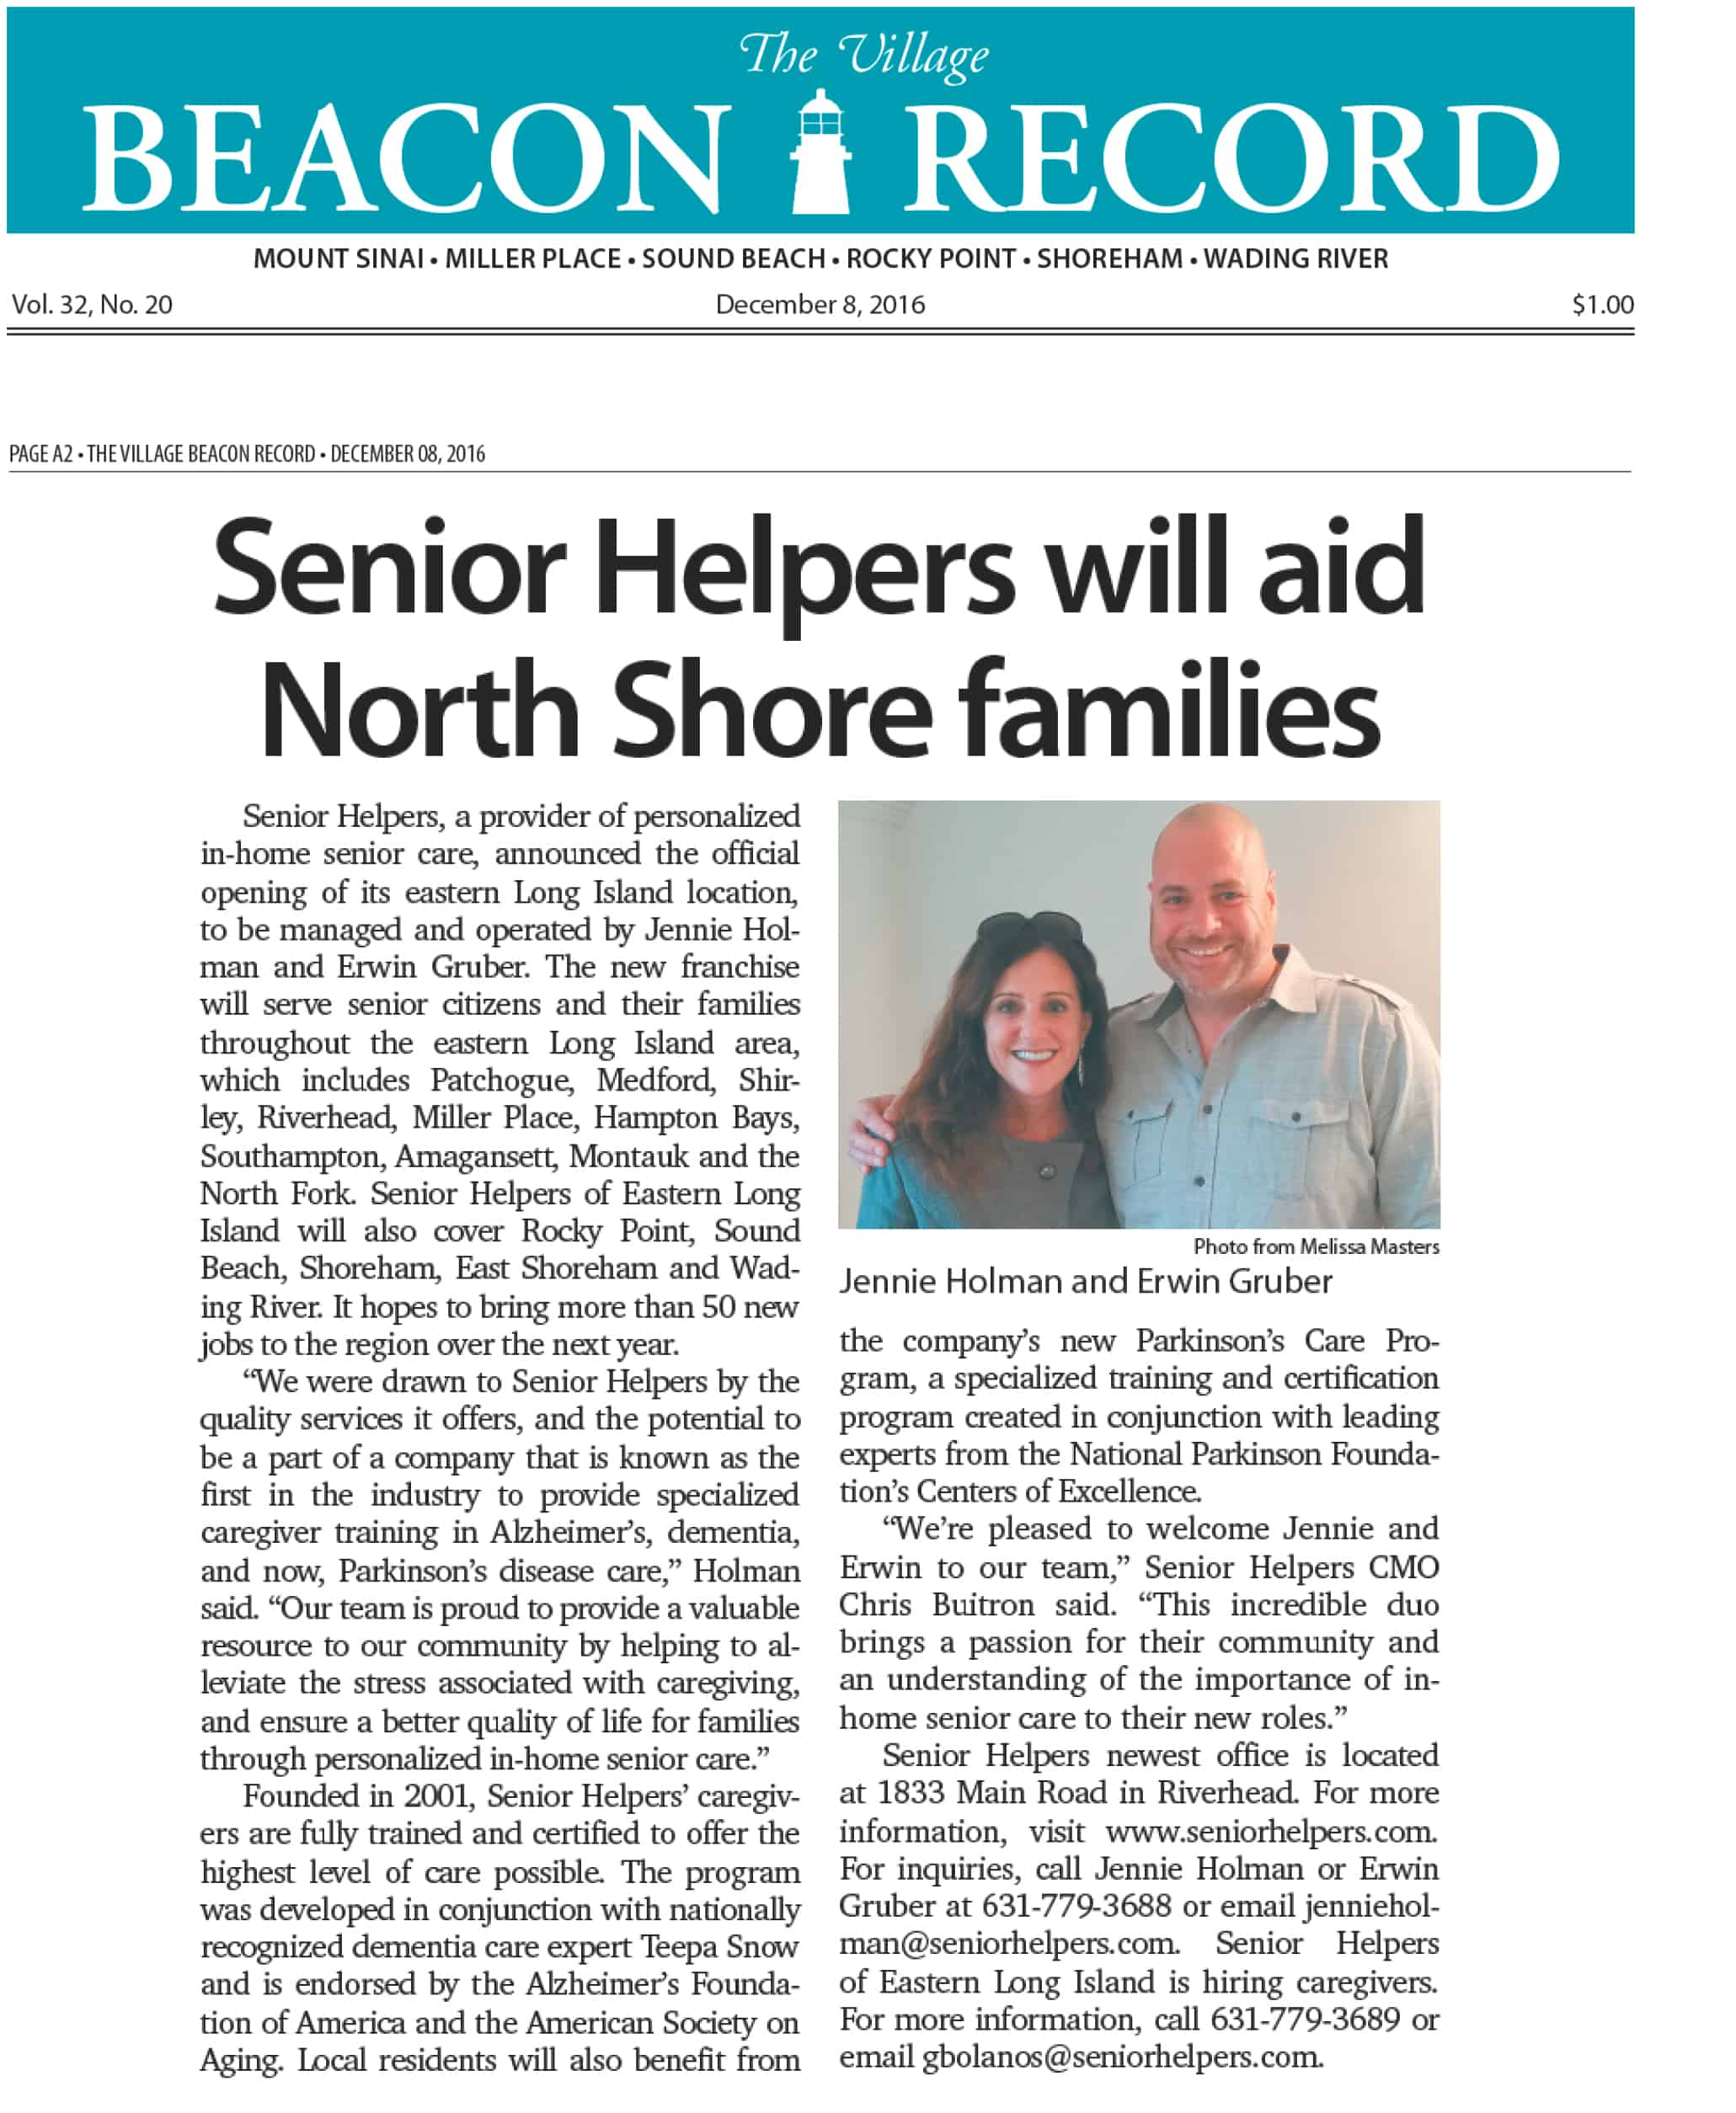 Senior Helpers will aid North Shore families